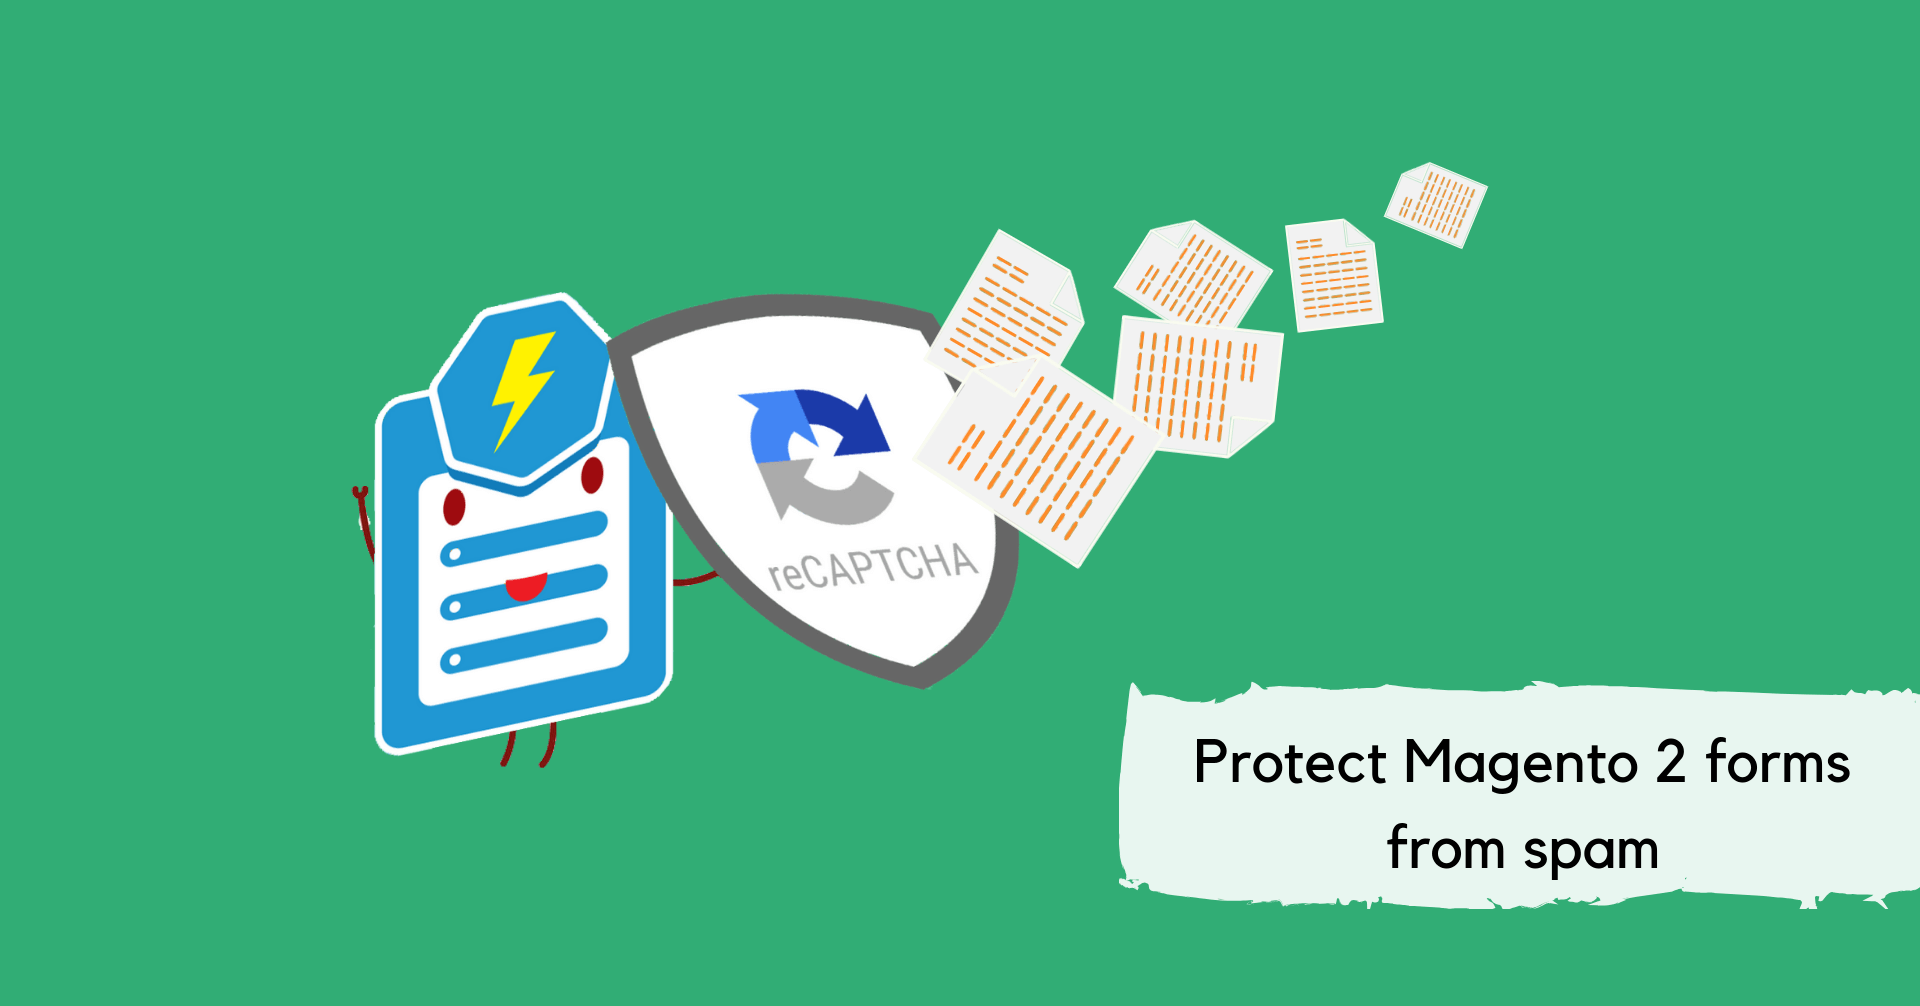 Protect Magento 2 forms from spams with Captcha